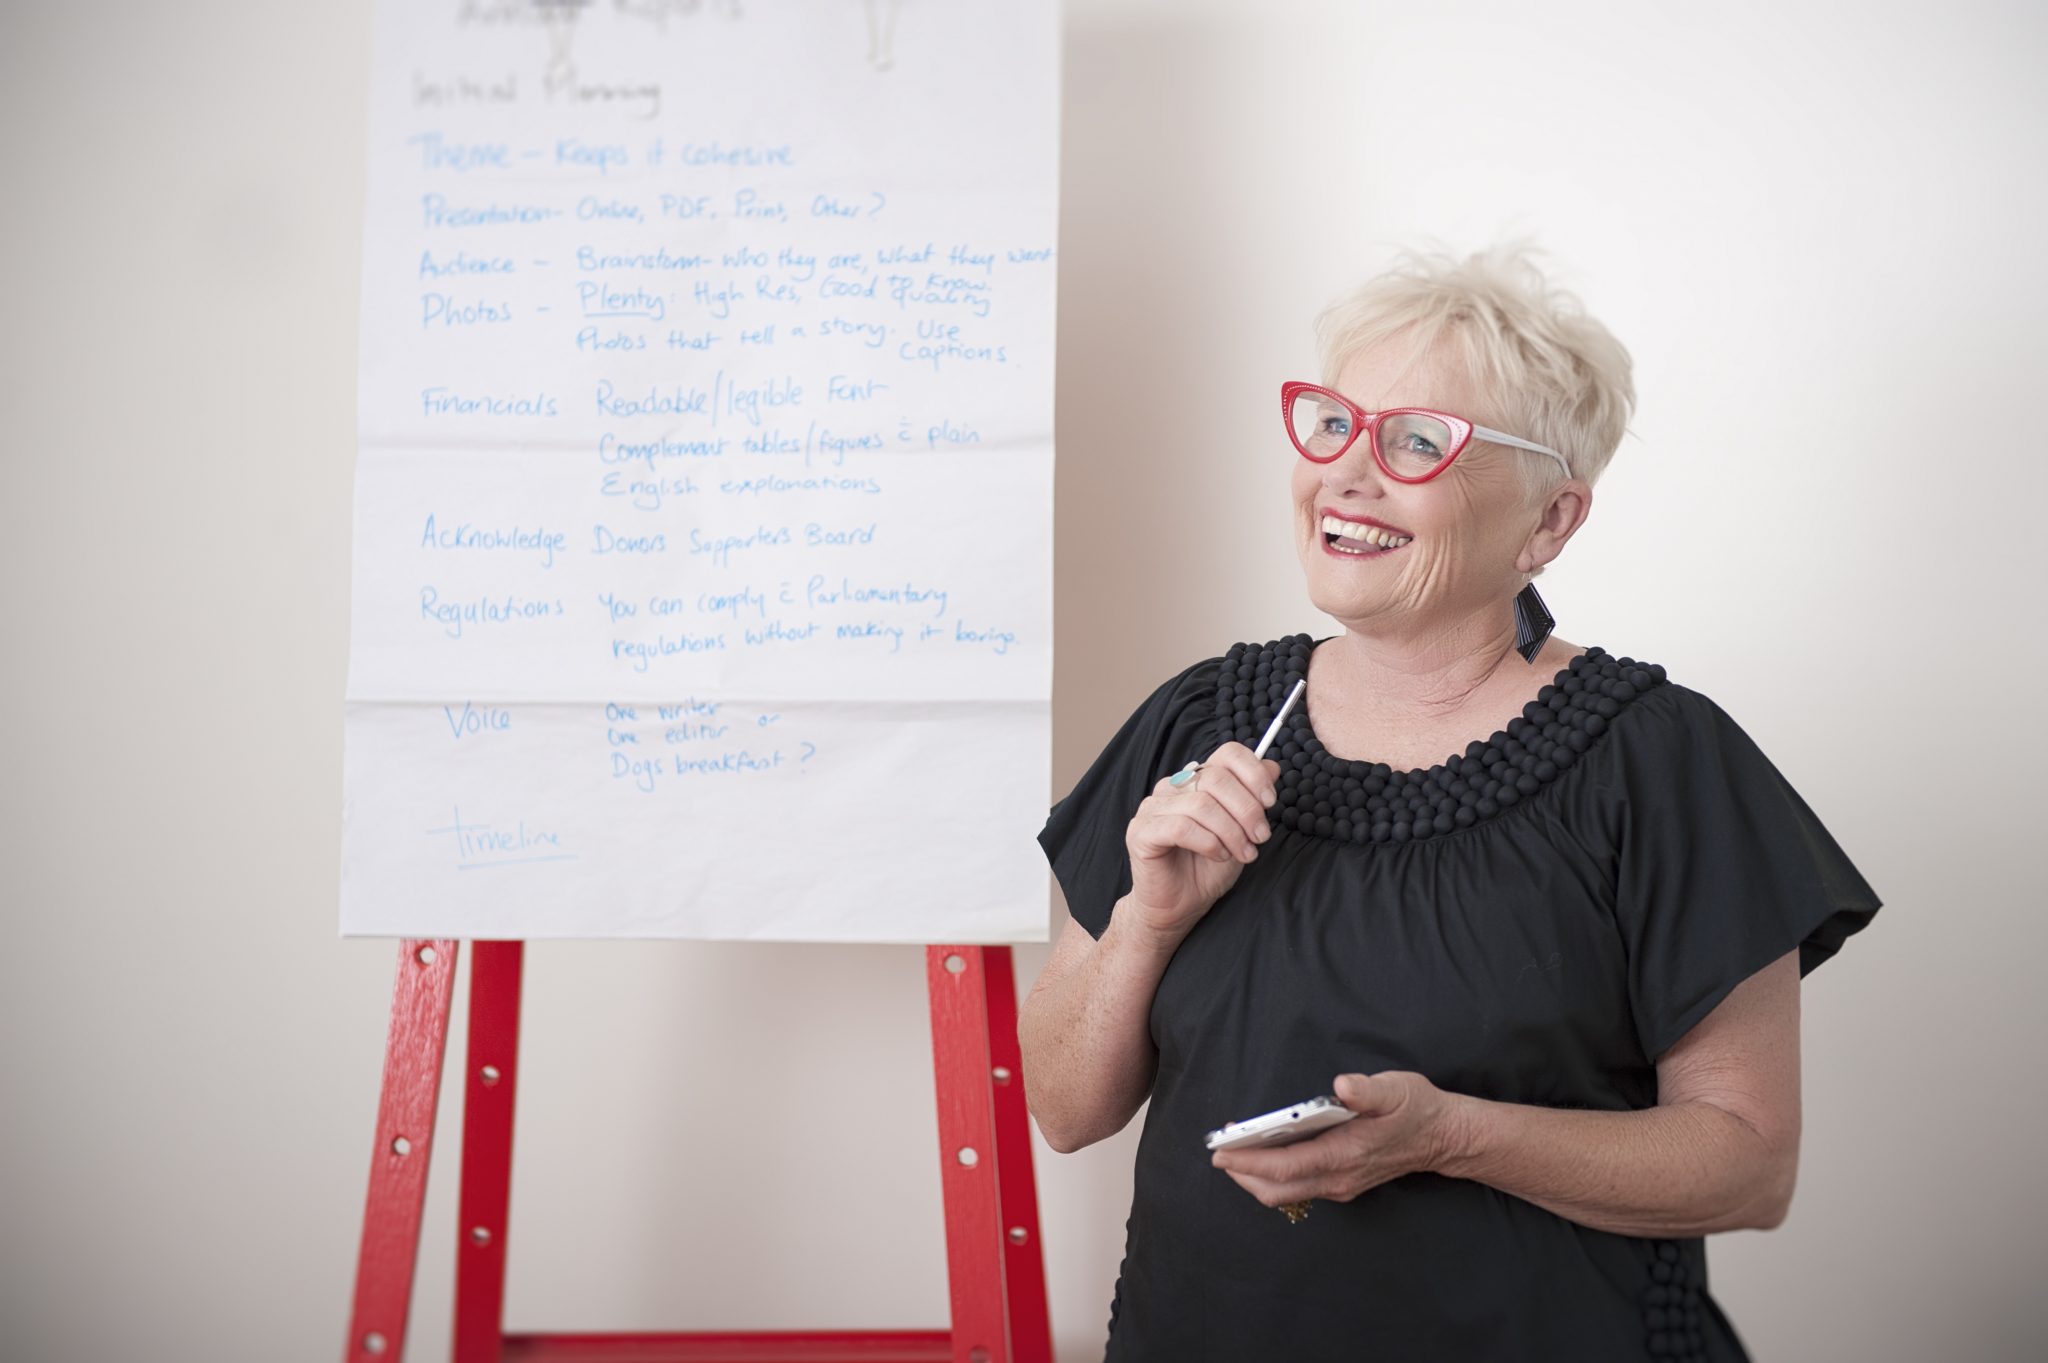 Image of Noelene Gration, an experienced marketing mentor in Daylesford, in front of a white board at a recent marketing workshop.